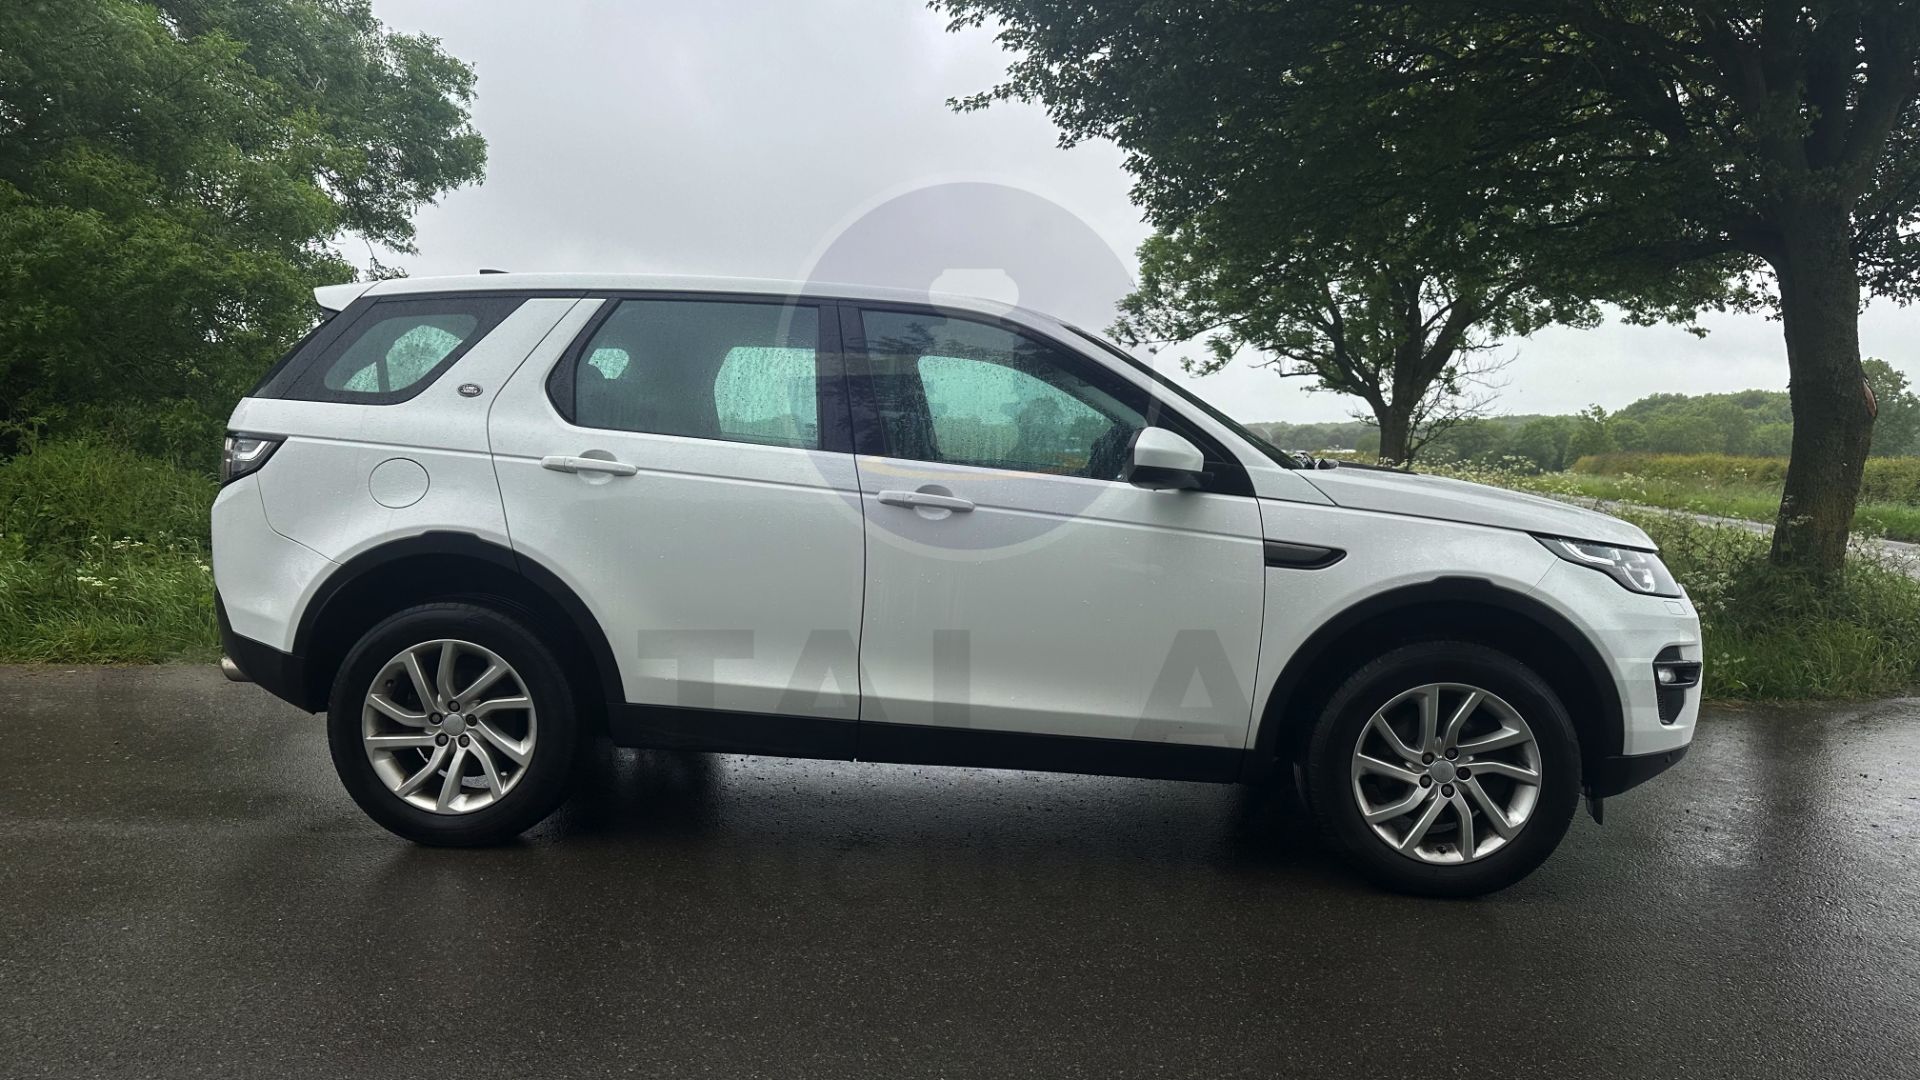 (On Sale) LAND ROVER DISCOVERY SPORT *SE TECH* 7 SEATER (66 REG - EURO 6) 2.0 TD4 - AUTO *HUGE SPEC* - Image 14 of 48